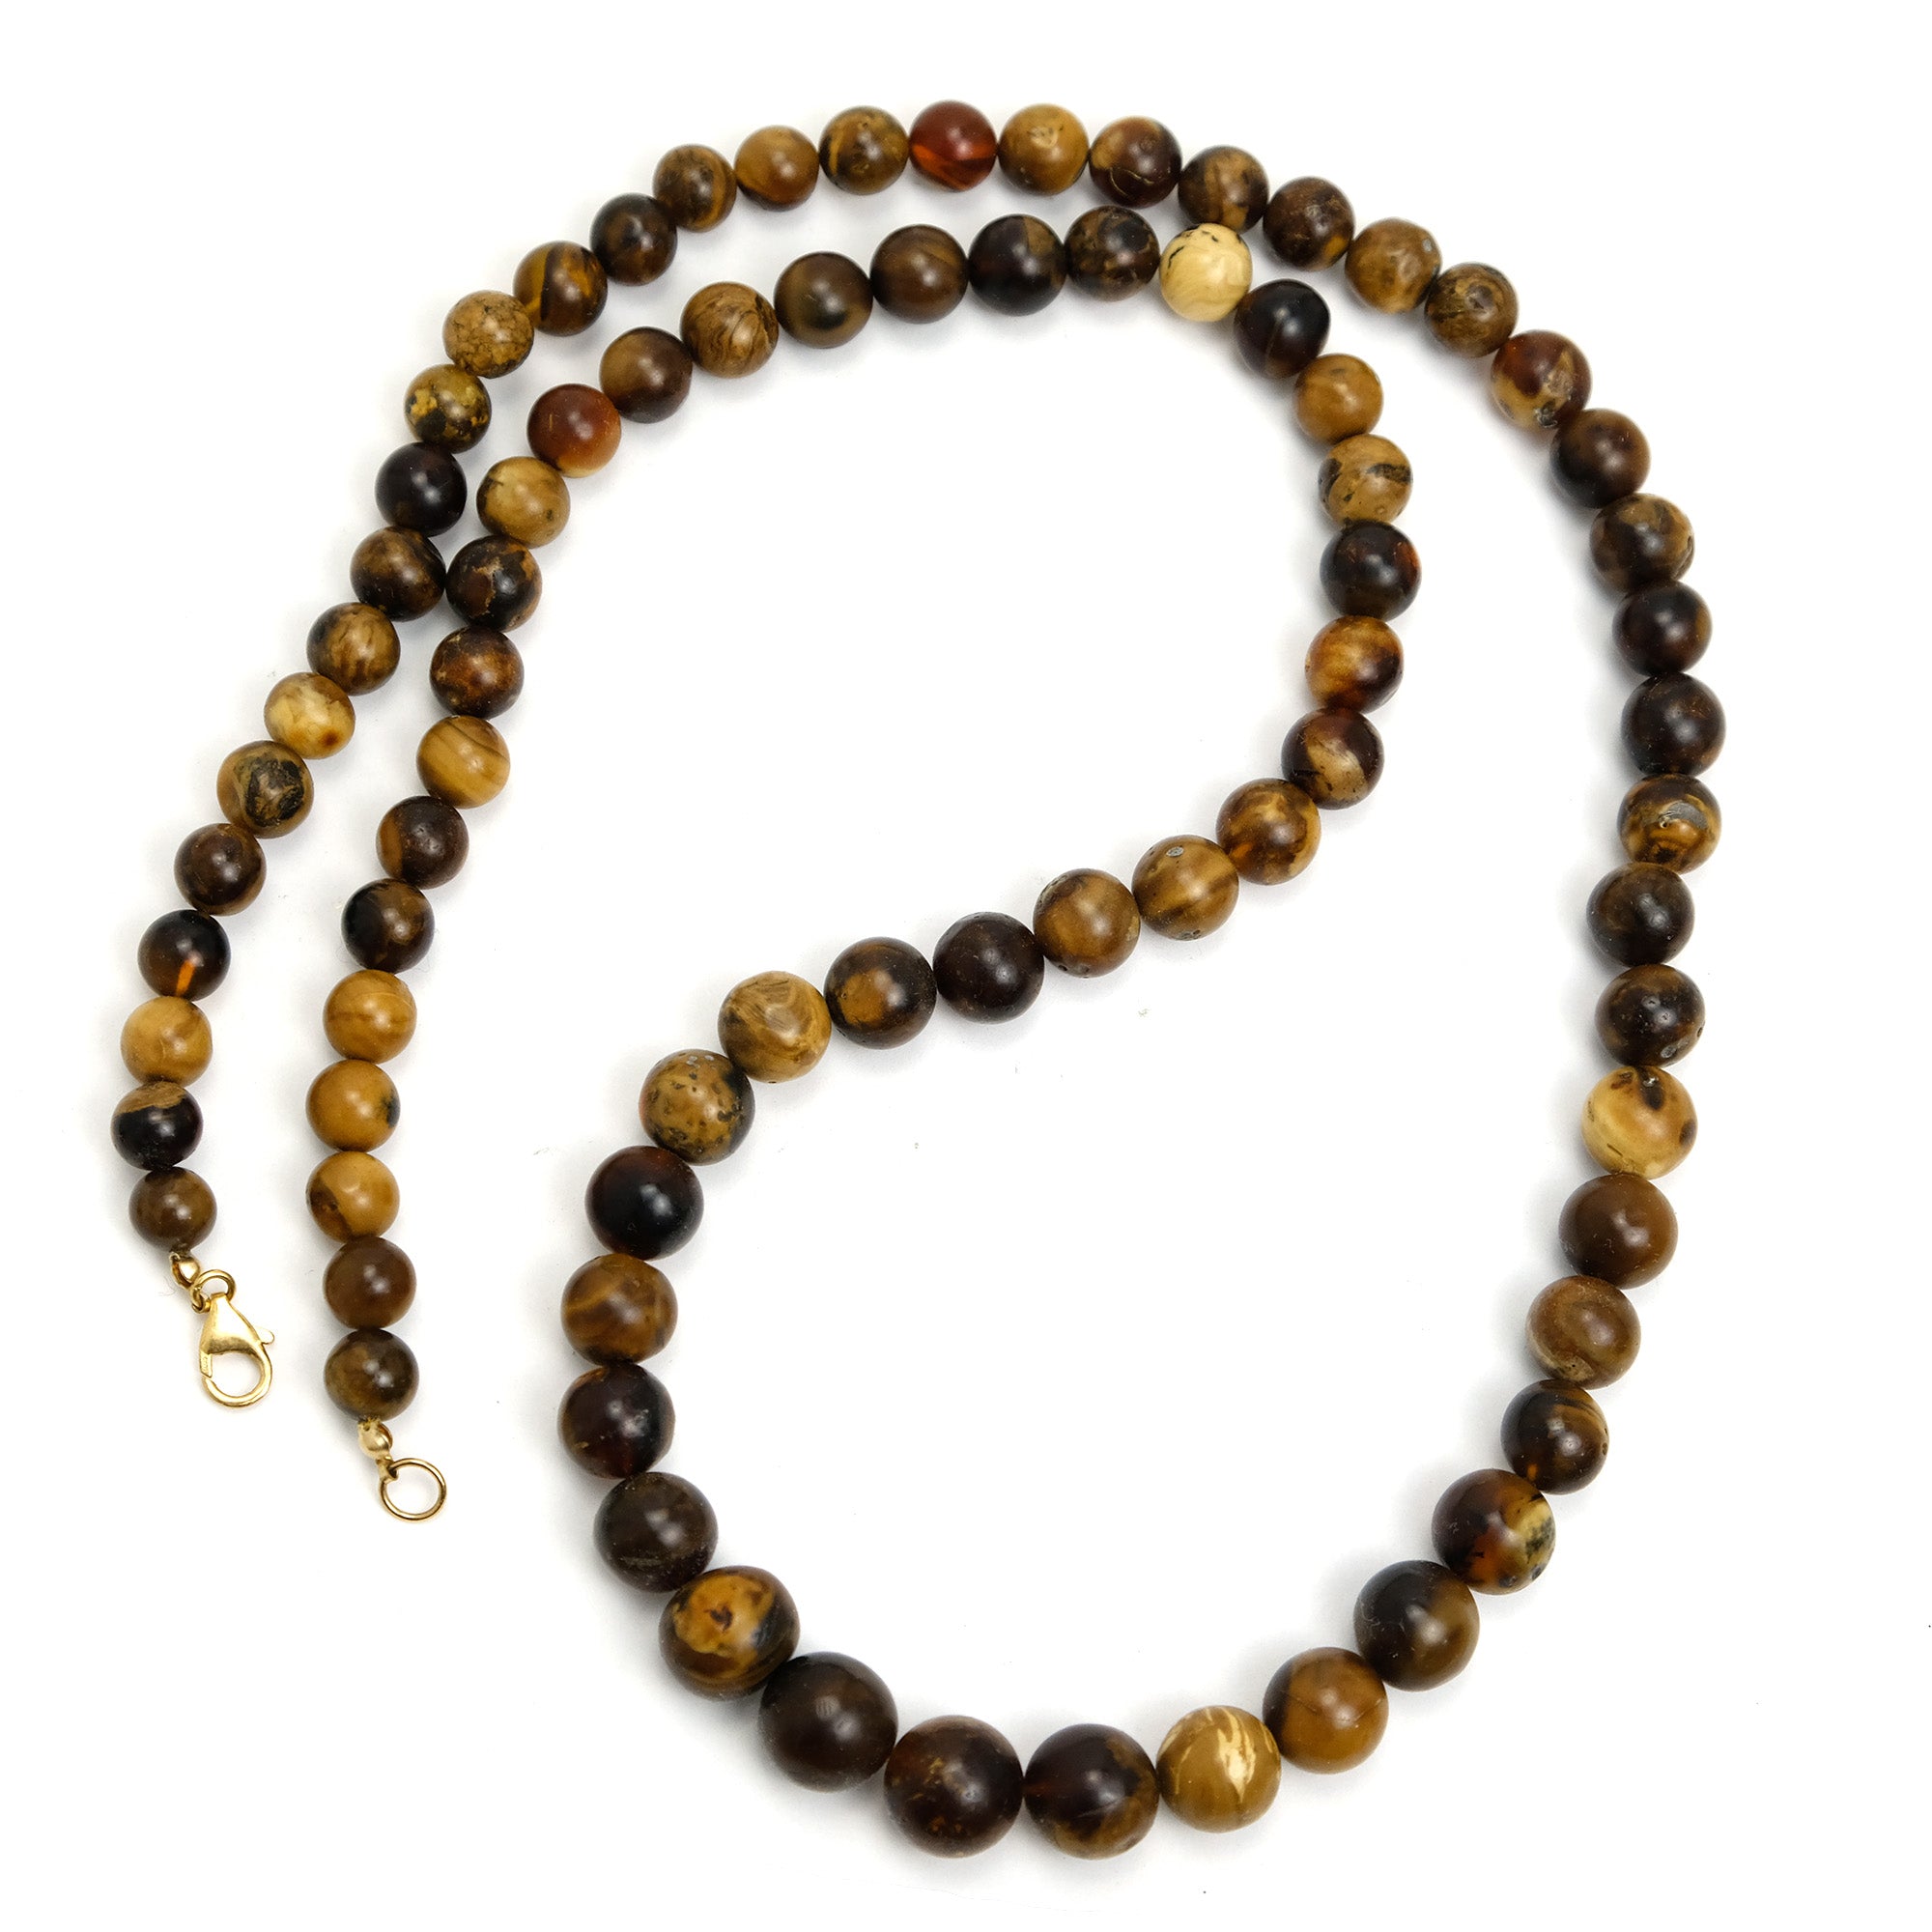 Beads of Paradise | Shop for Handmade Jewelry & Vintage Goods